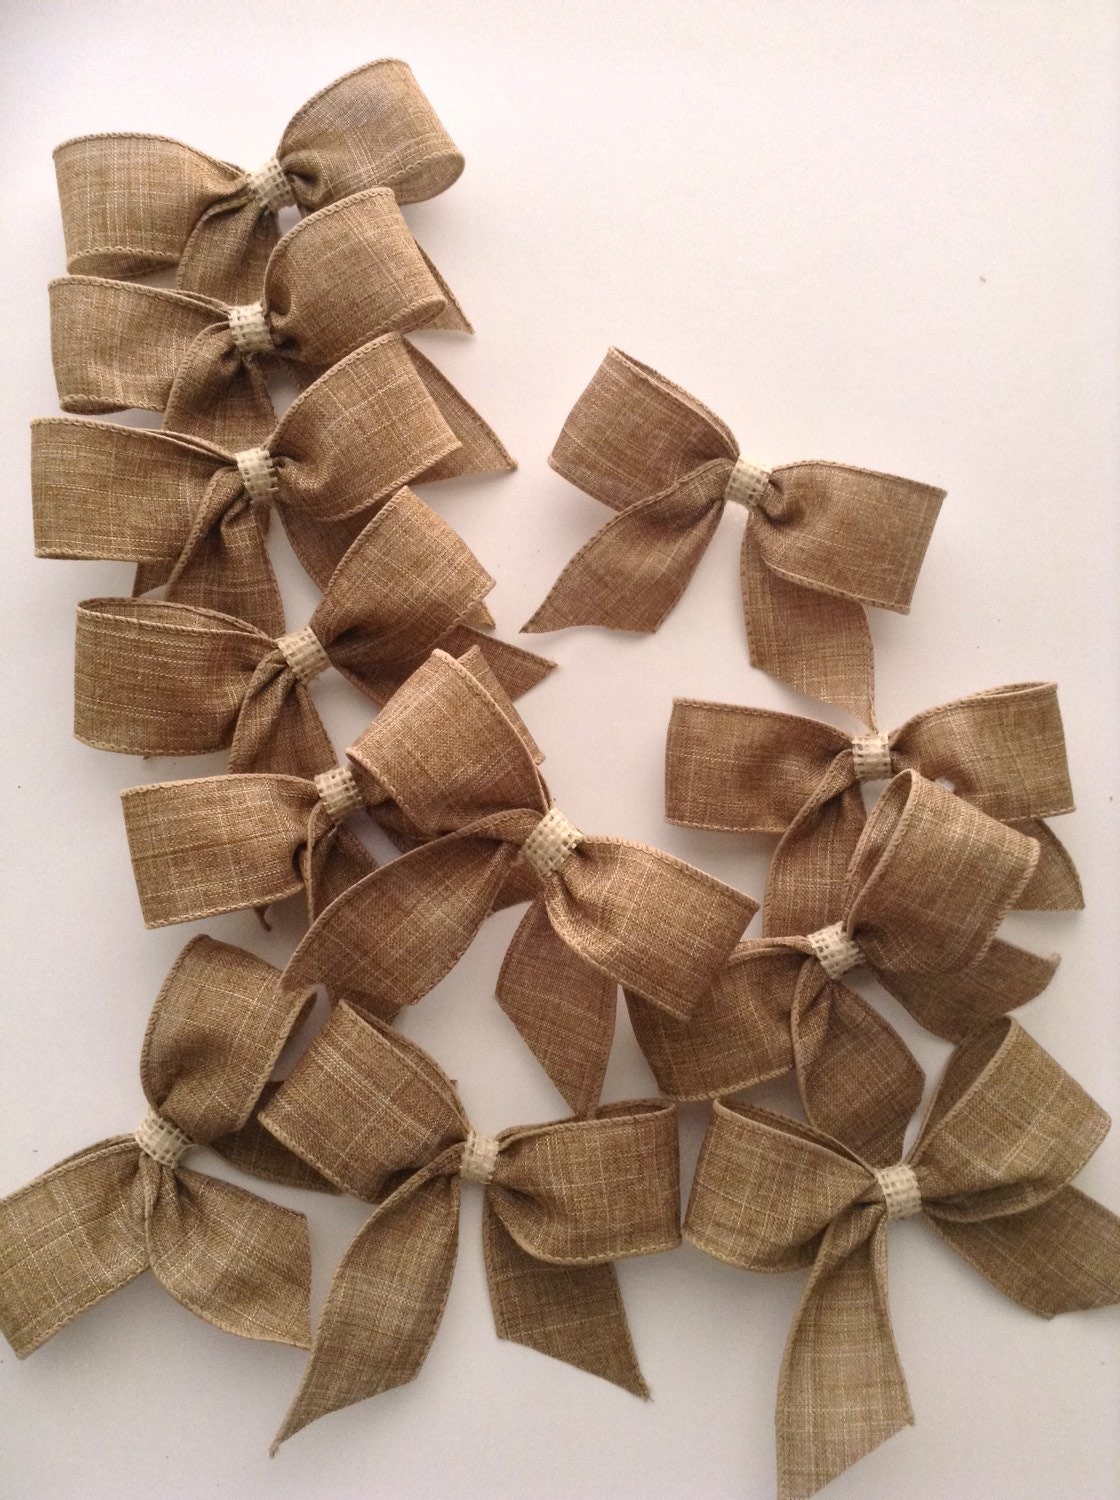 12-Pack Handmade Burlap Bows for DIY Crafts and Wedding Decor